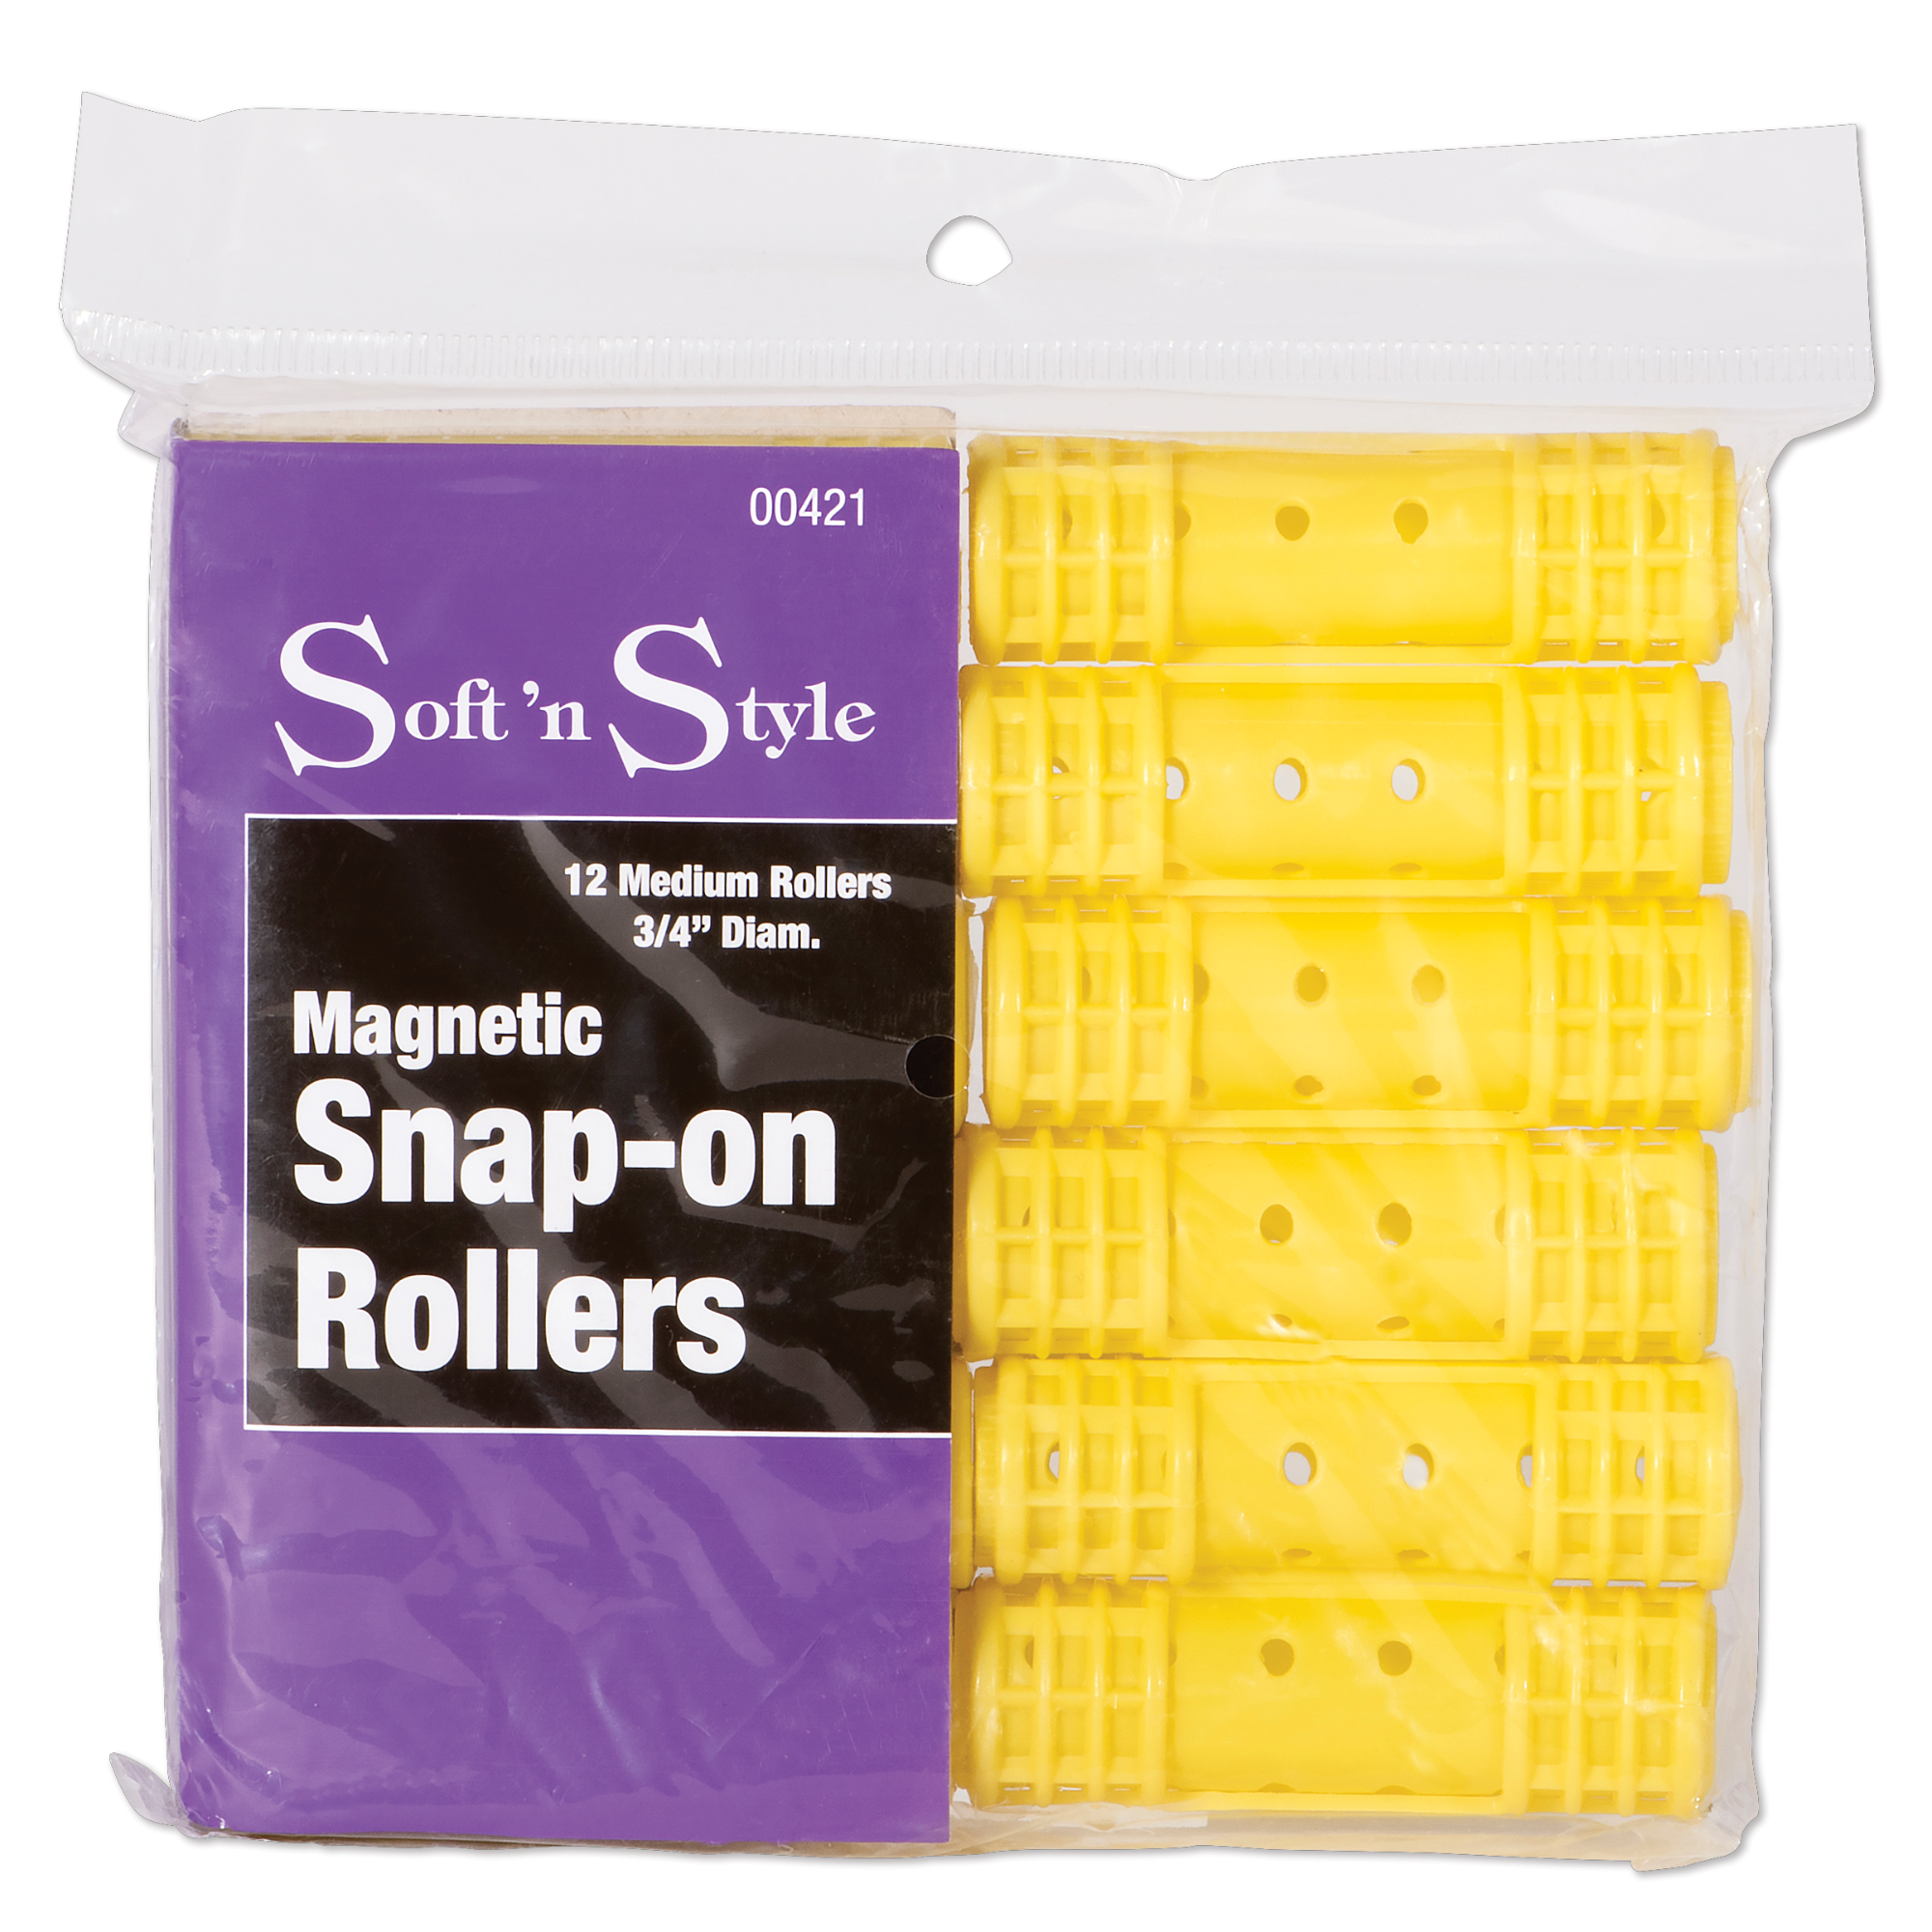 Magnetic Snap-on Rollers, Medium - 3/4"